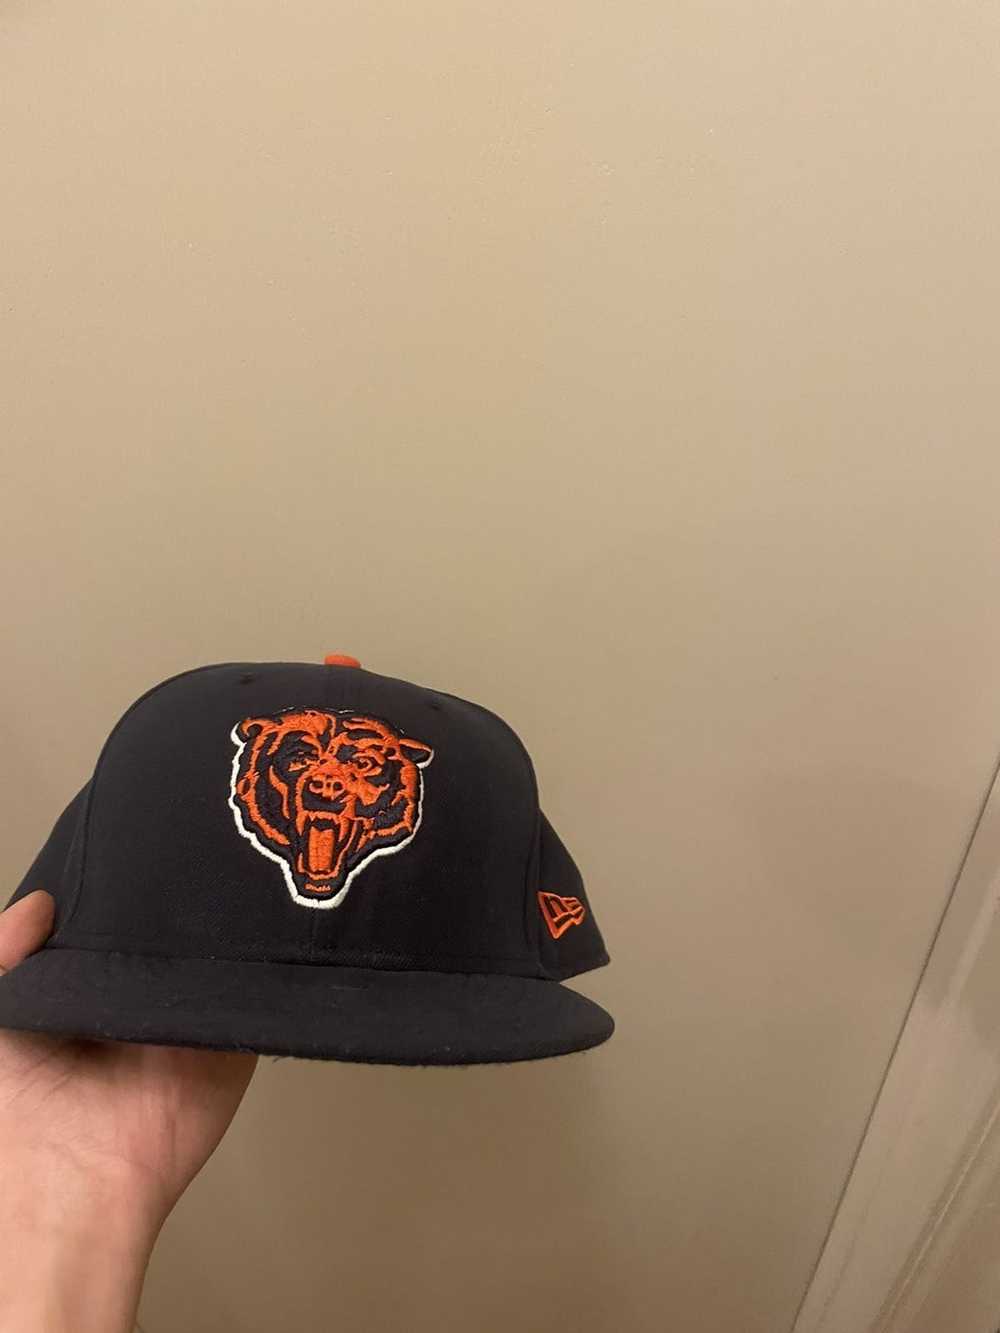 Mitchell & Ness Chicago bears fitted hat - image 1